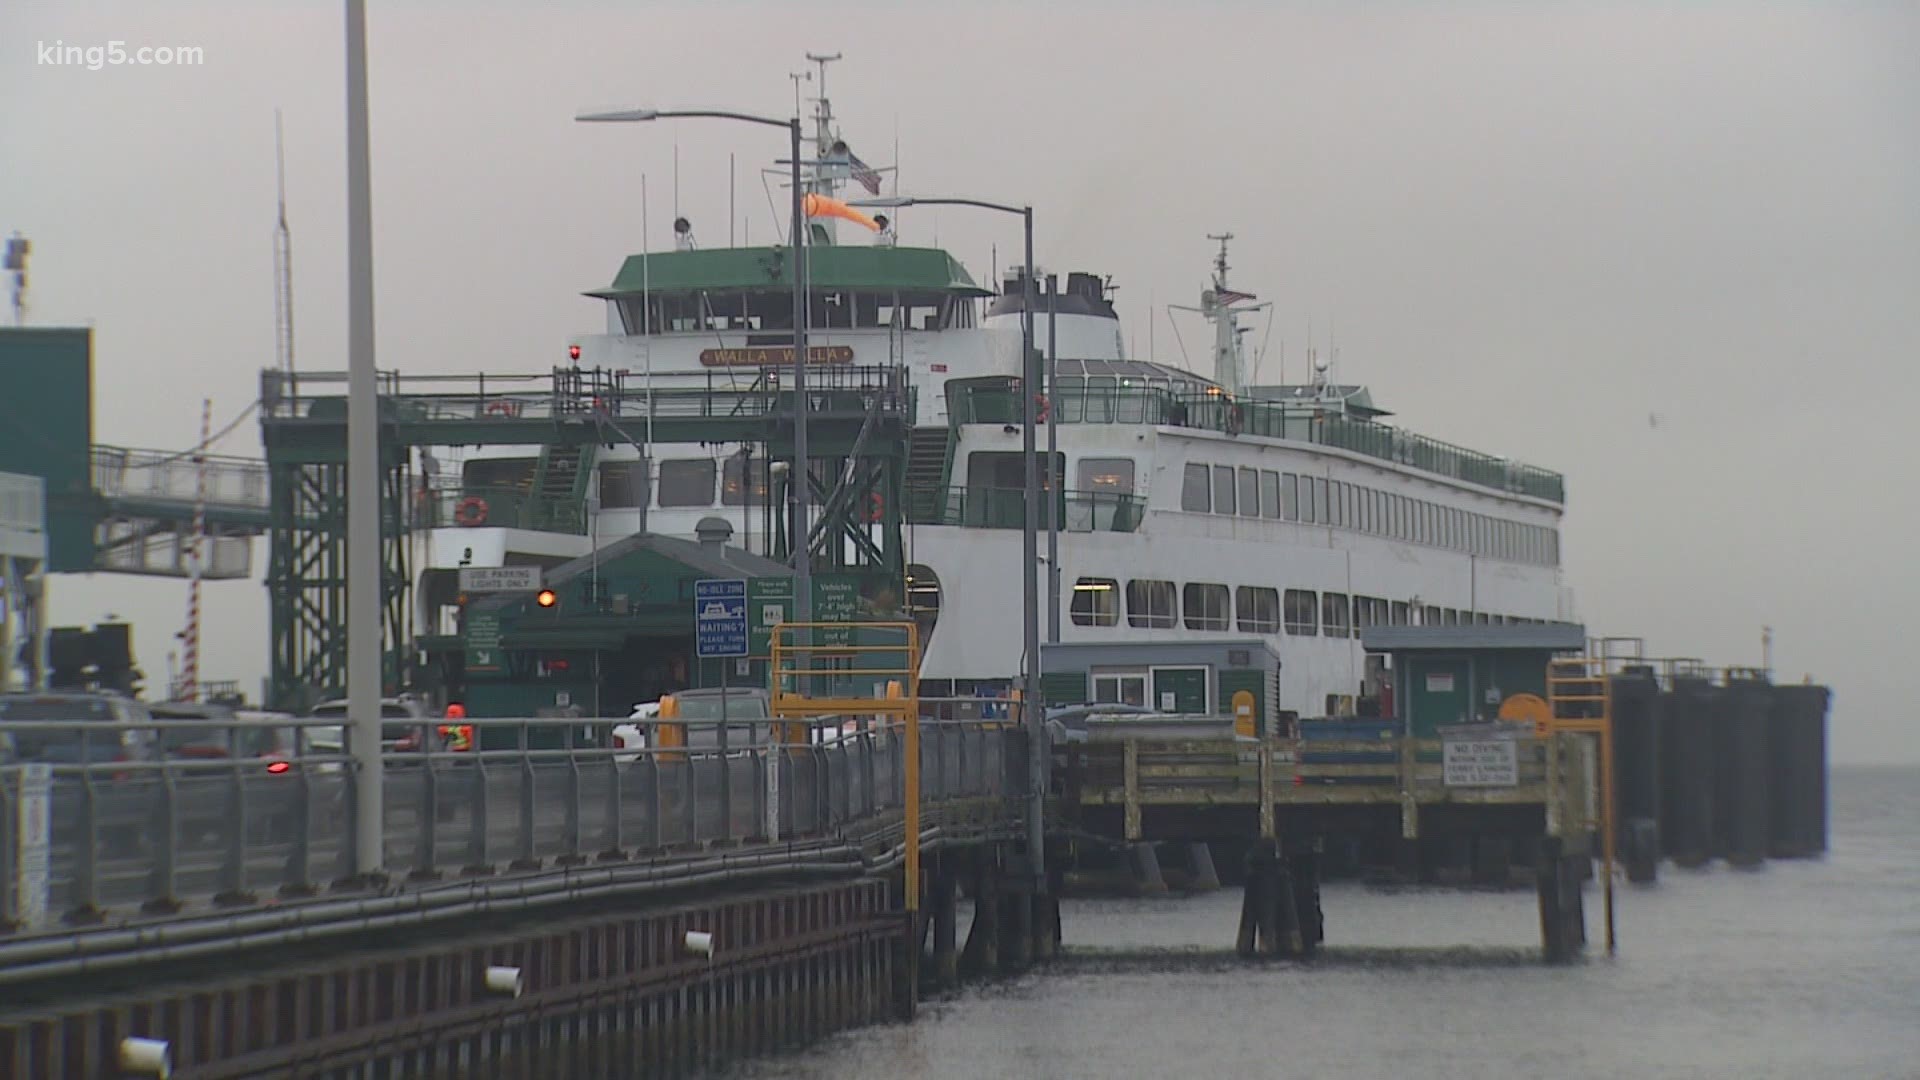 Lightning hits Edmonds ferry, putting it out of service | king5.com